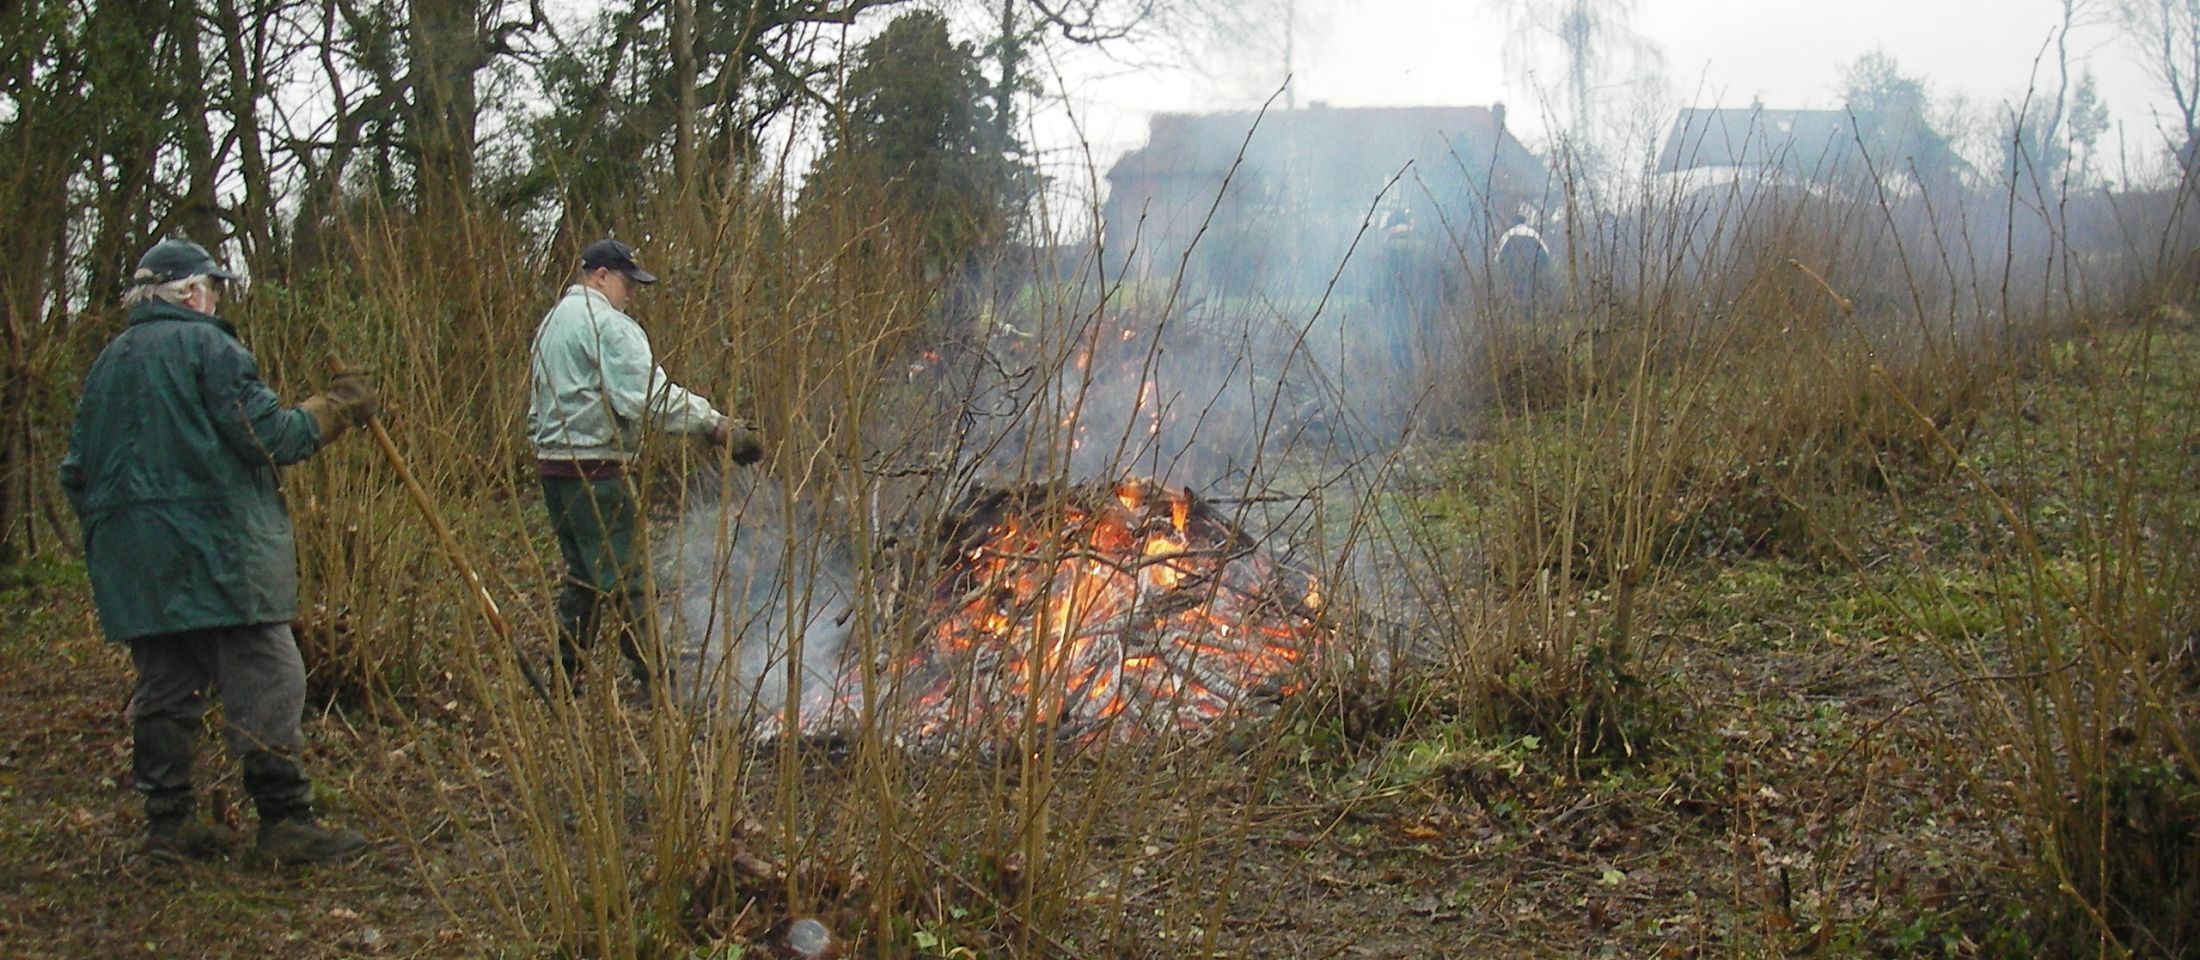 Burning off, after coppice. Photo: Medway Valley